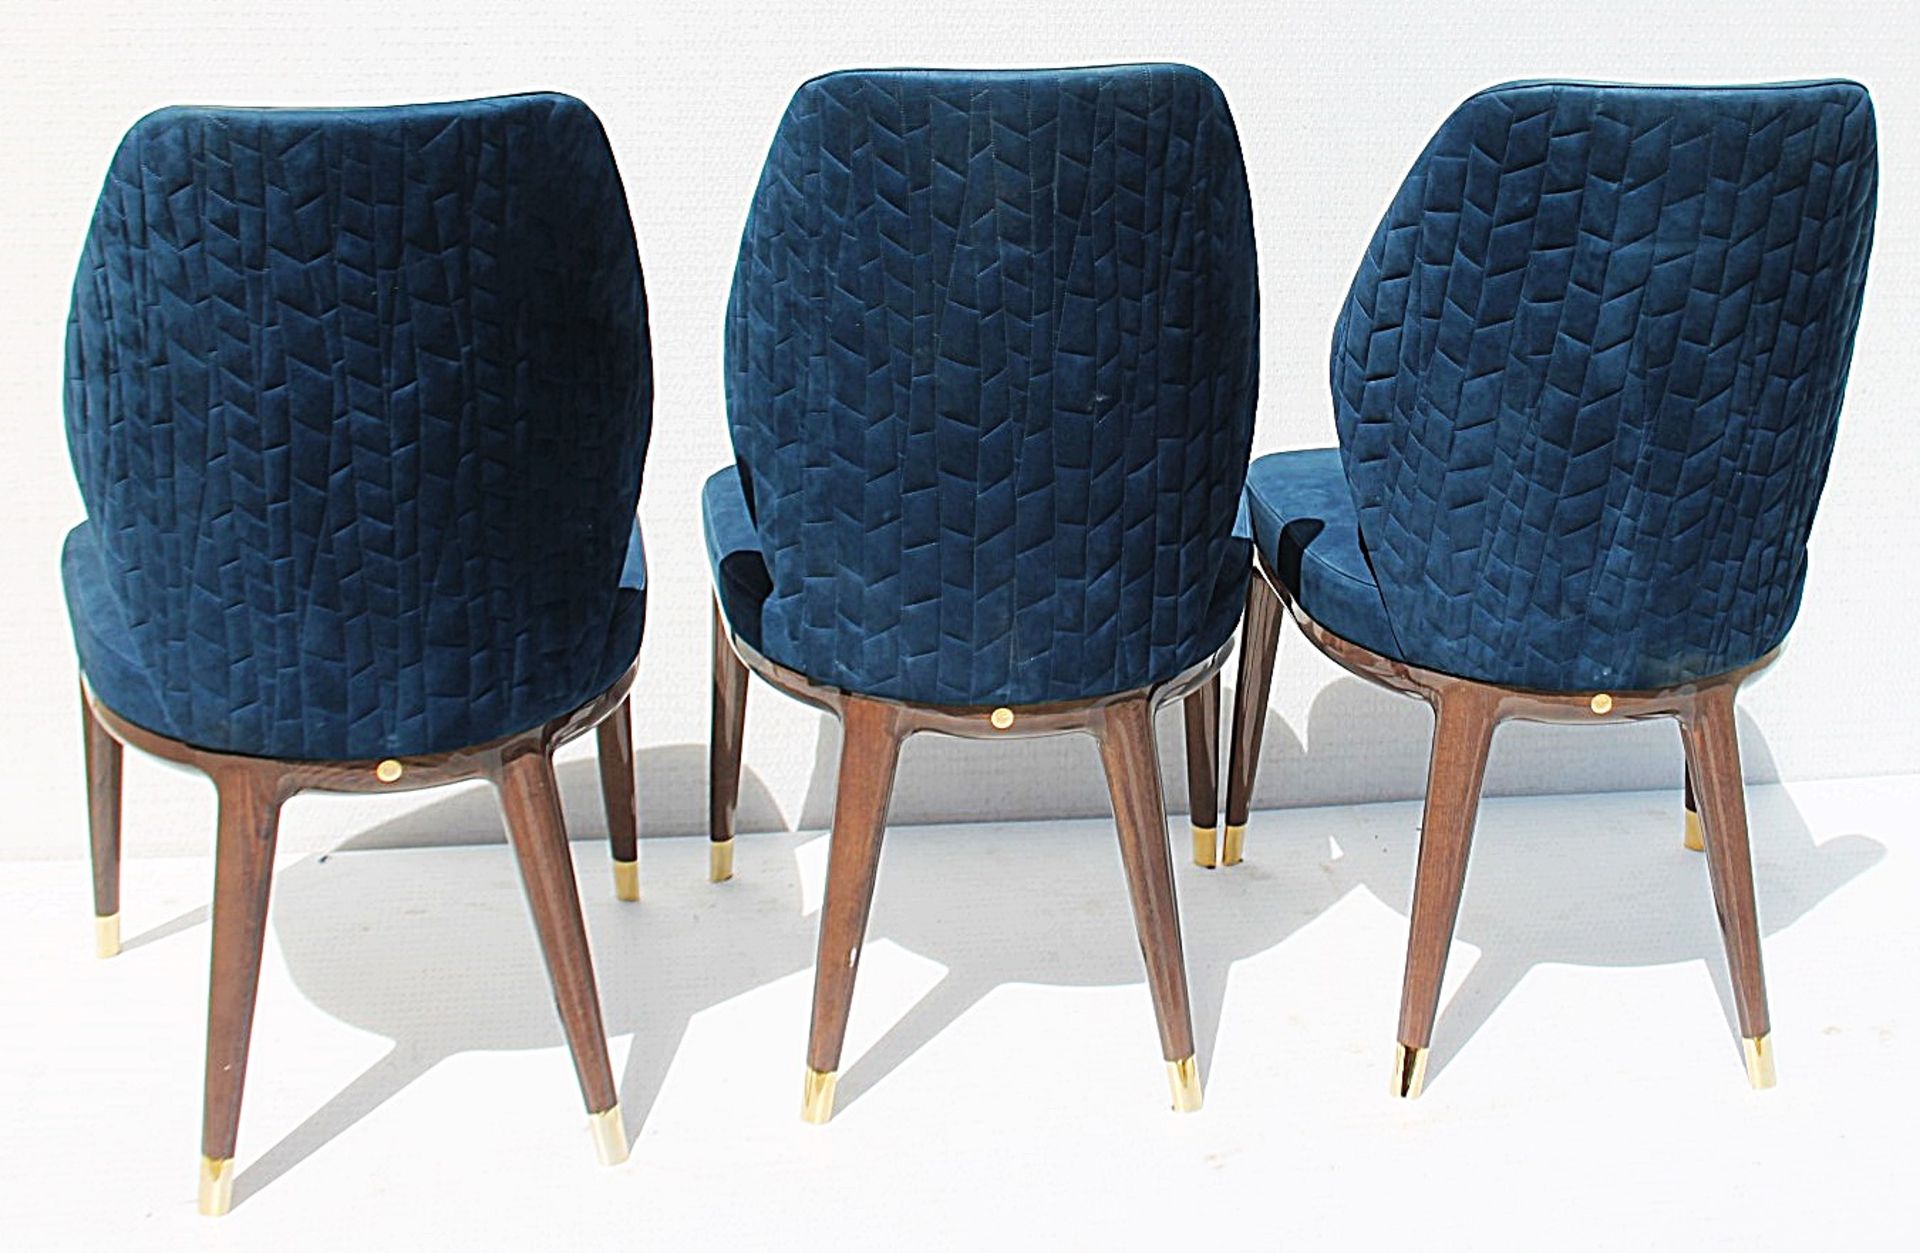 6 x GIORGIO COLLECTION 'Charisma' Luxury Dining Side Chairs In Blue - Total Original Price £15,330 - Image 10 of 17